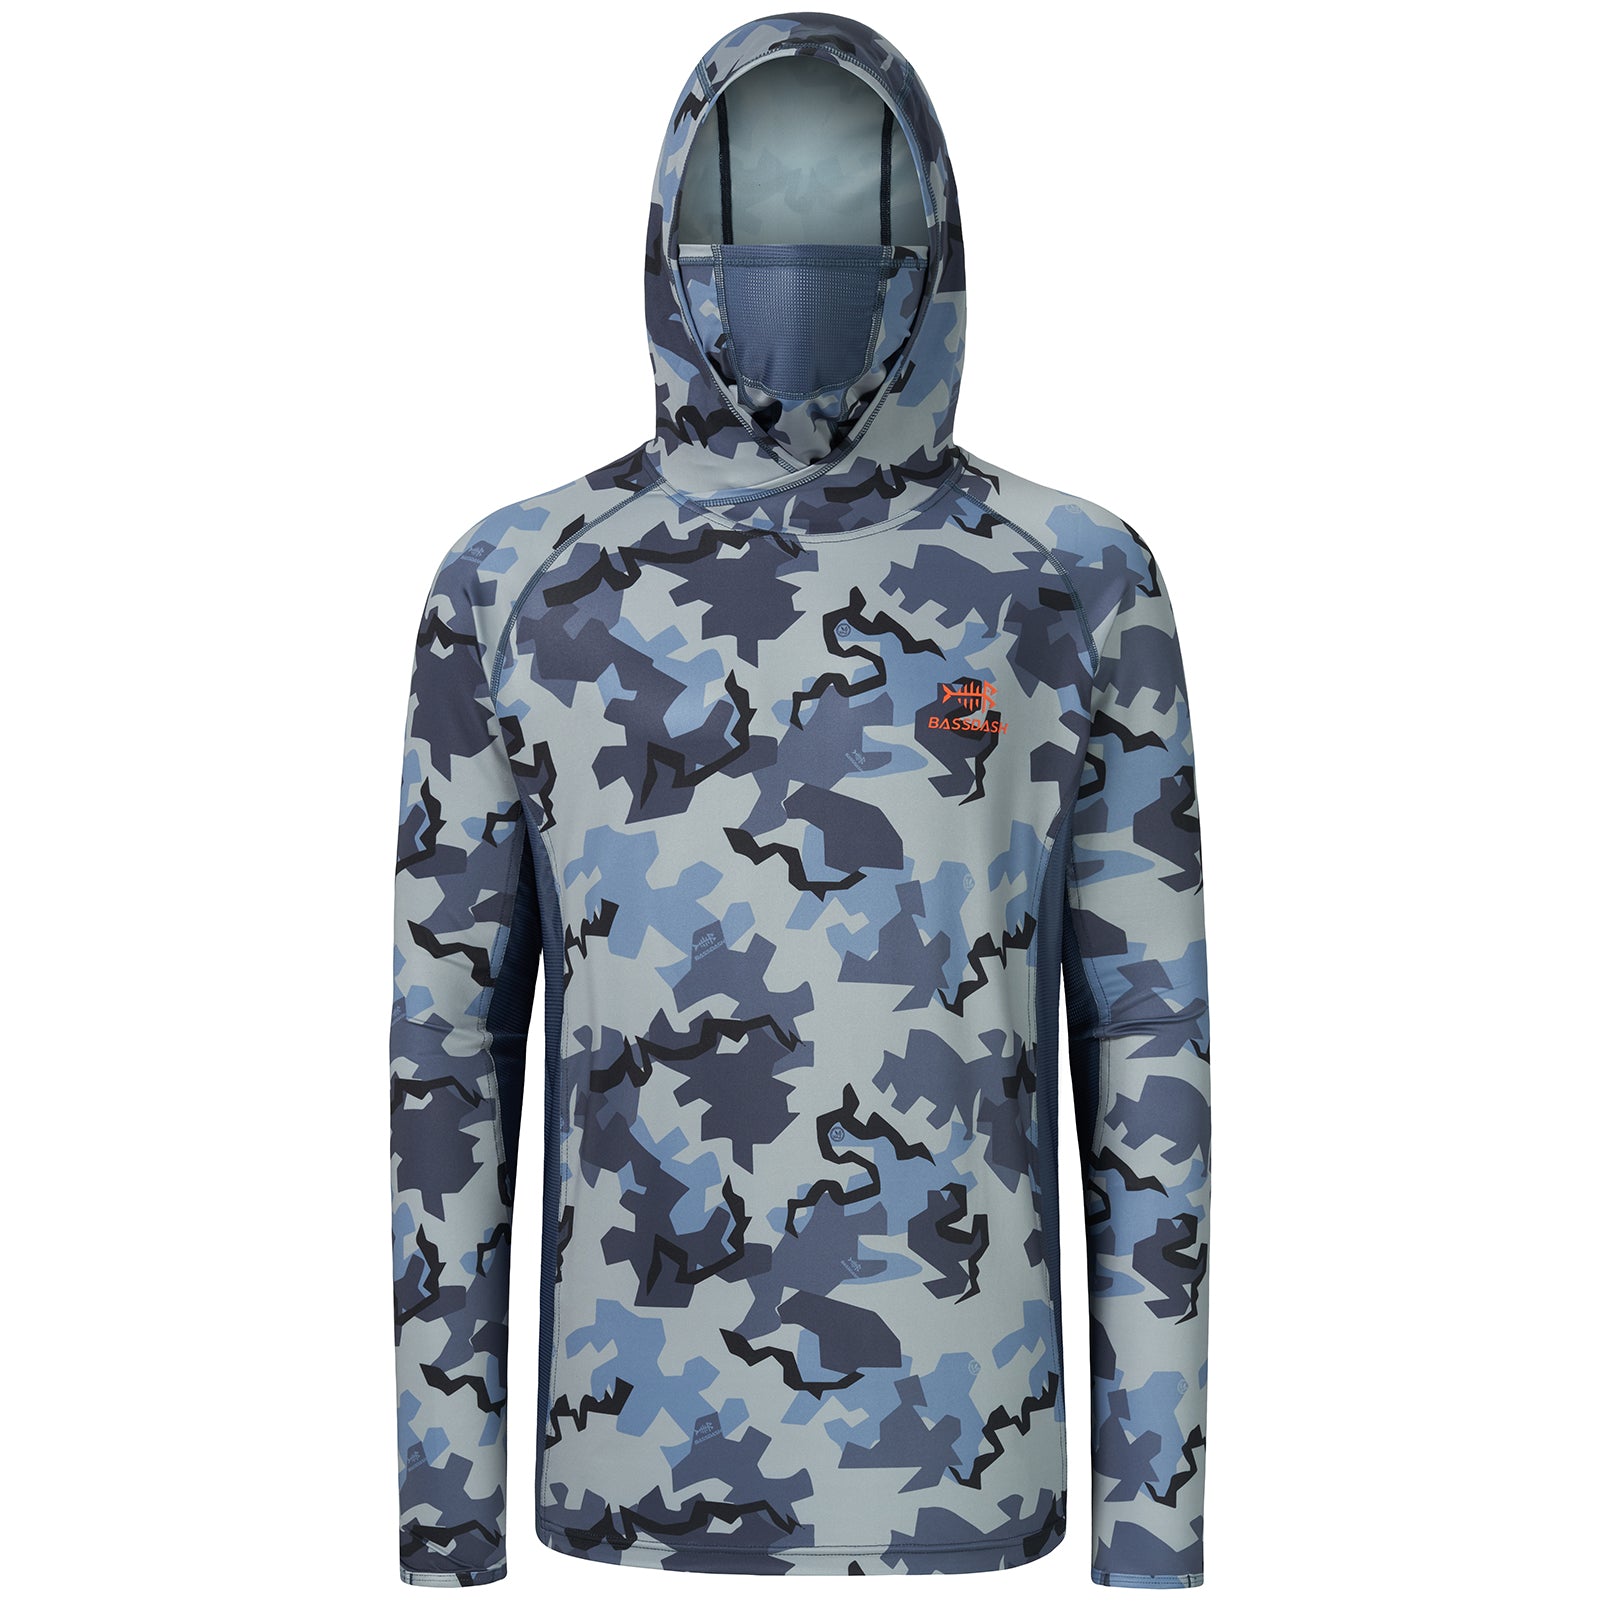 Men's Hunting Hoodies UPF 50 Long Sleeve with Mask | Bassdash Hunting Open Terrain / Small